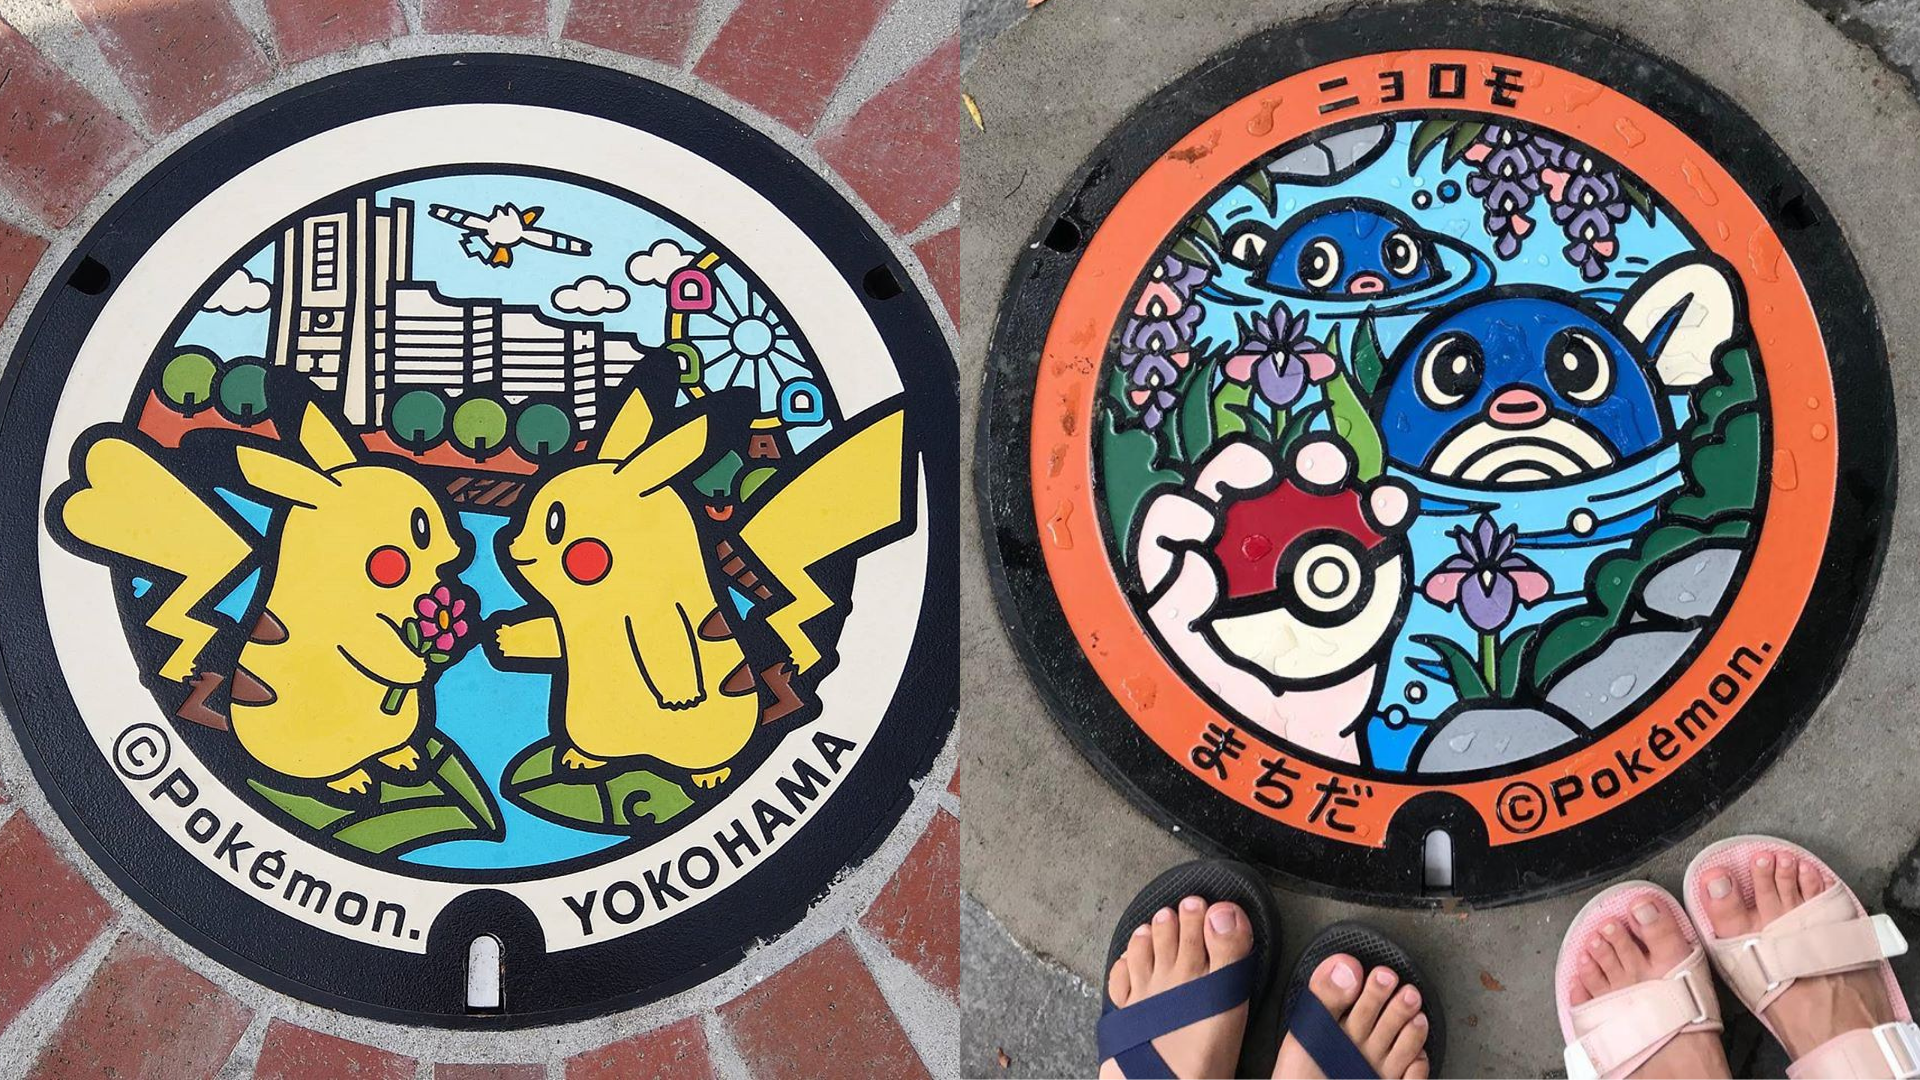 Pokemon Manhole Covers Have Finally Hit The Streets Of Tokyo Catch All 103 Of Them Across Japan Klook Travel Blog